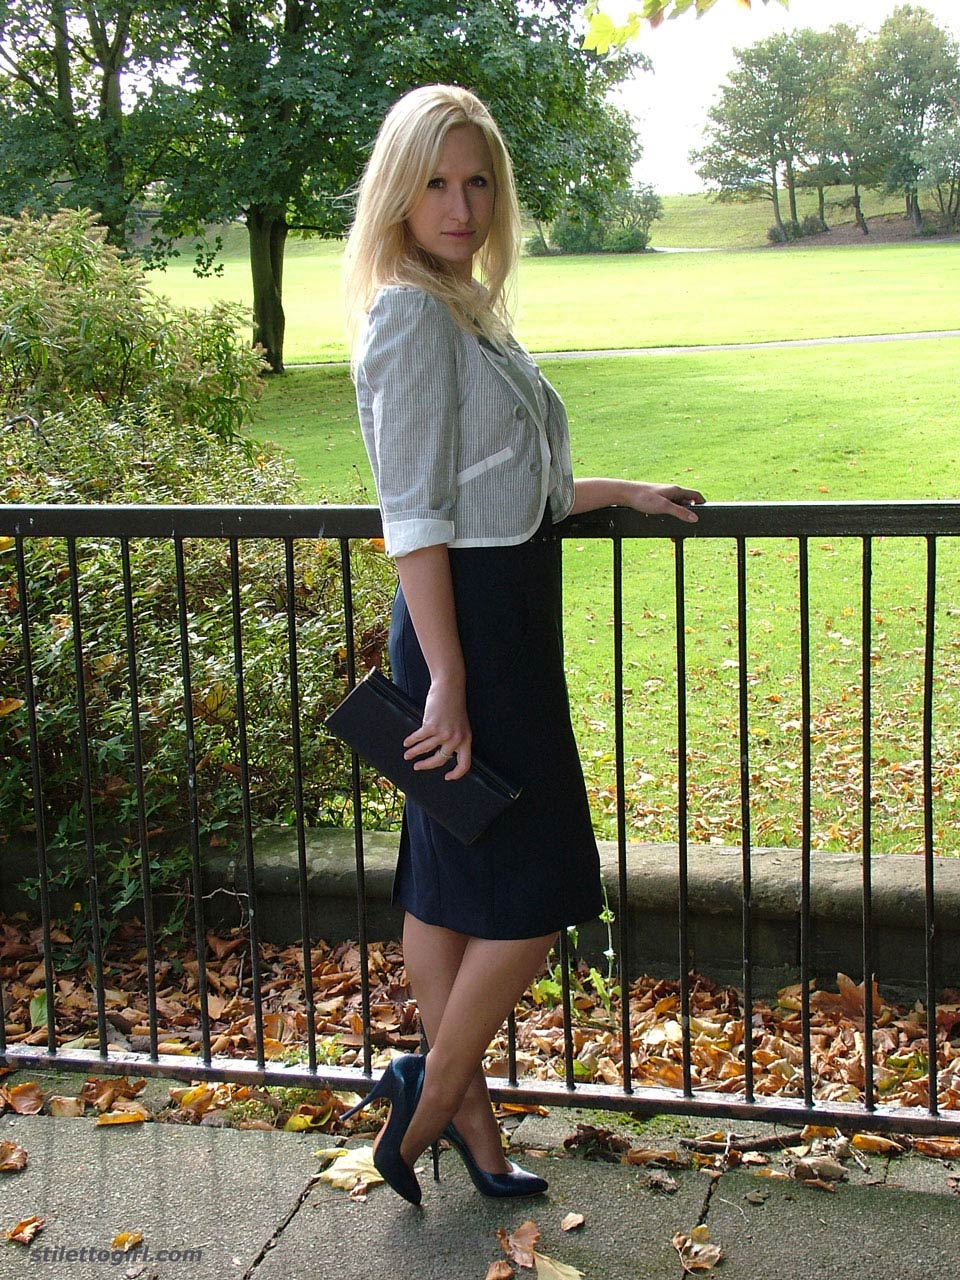 Mature In Heels And Pantyhose Pic 1 Of Blonde Milf Teasing Outdoors In A Lovely Pair Of Blue